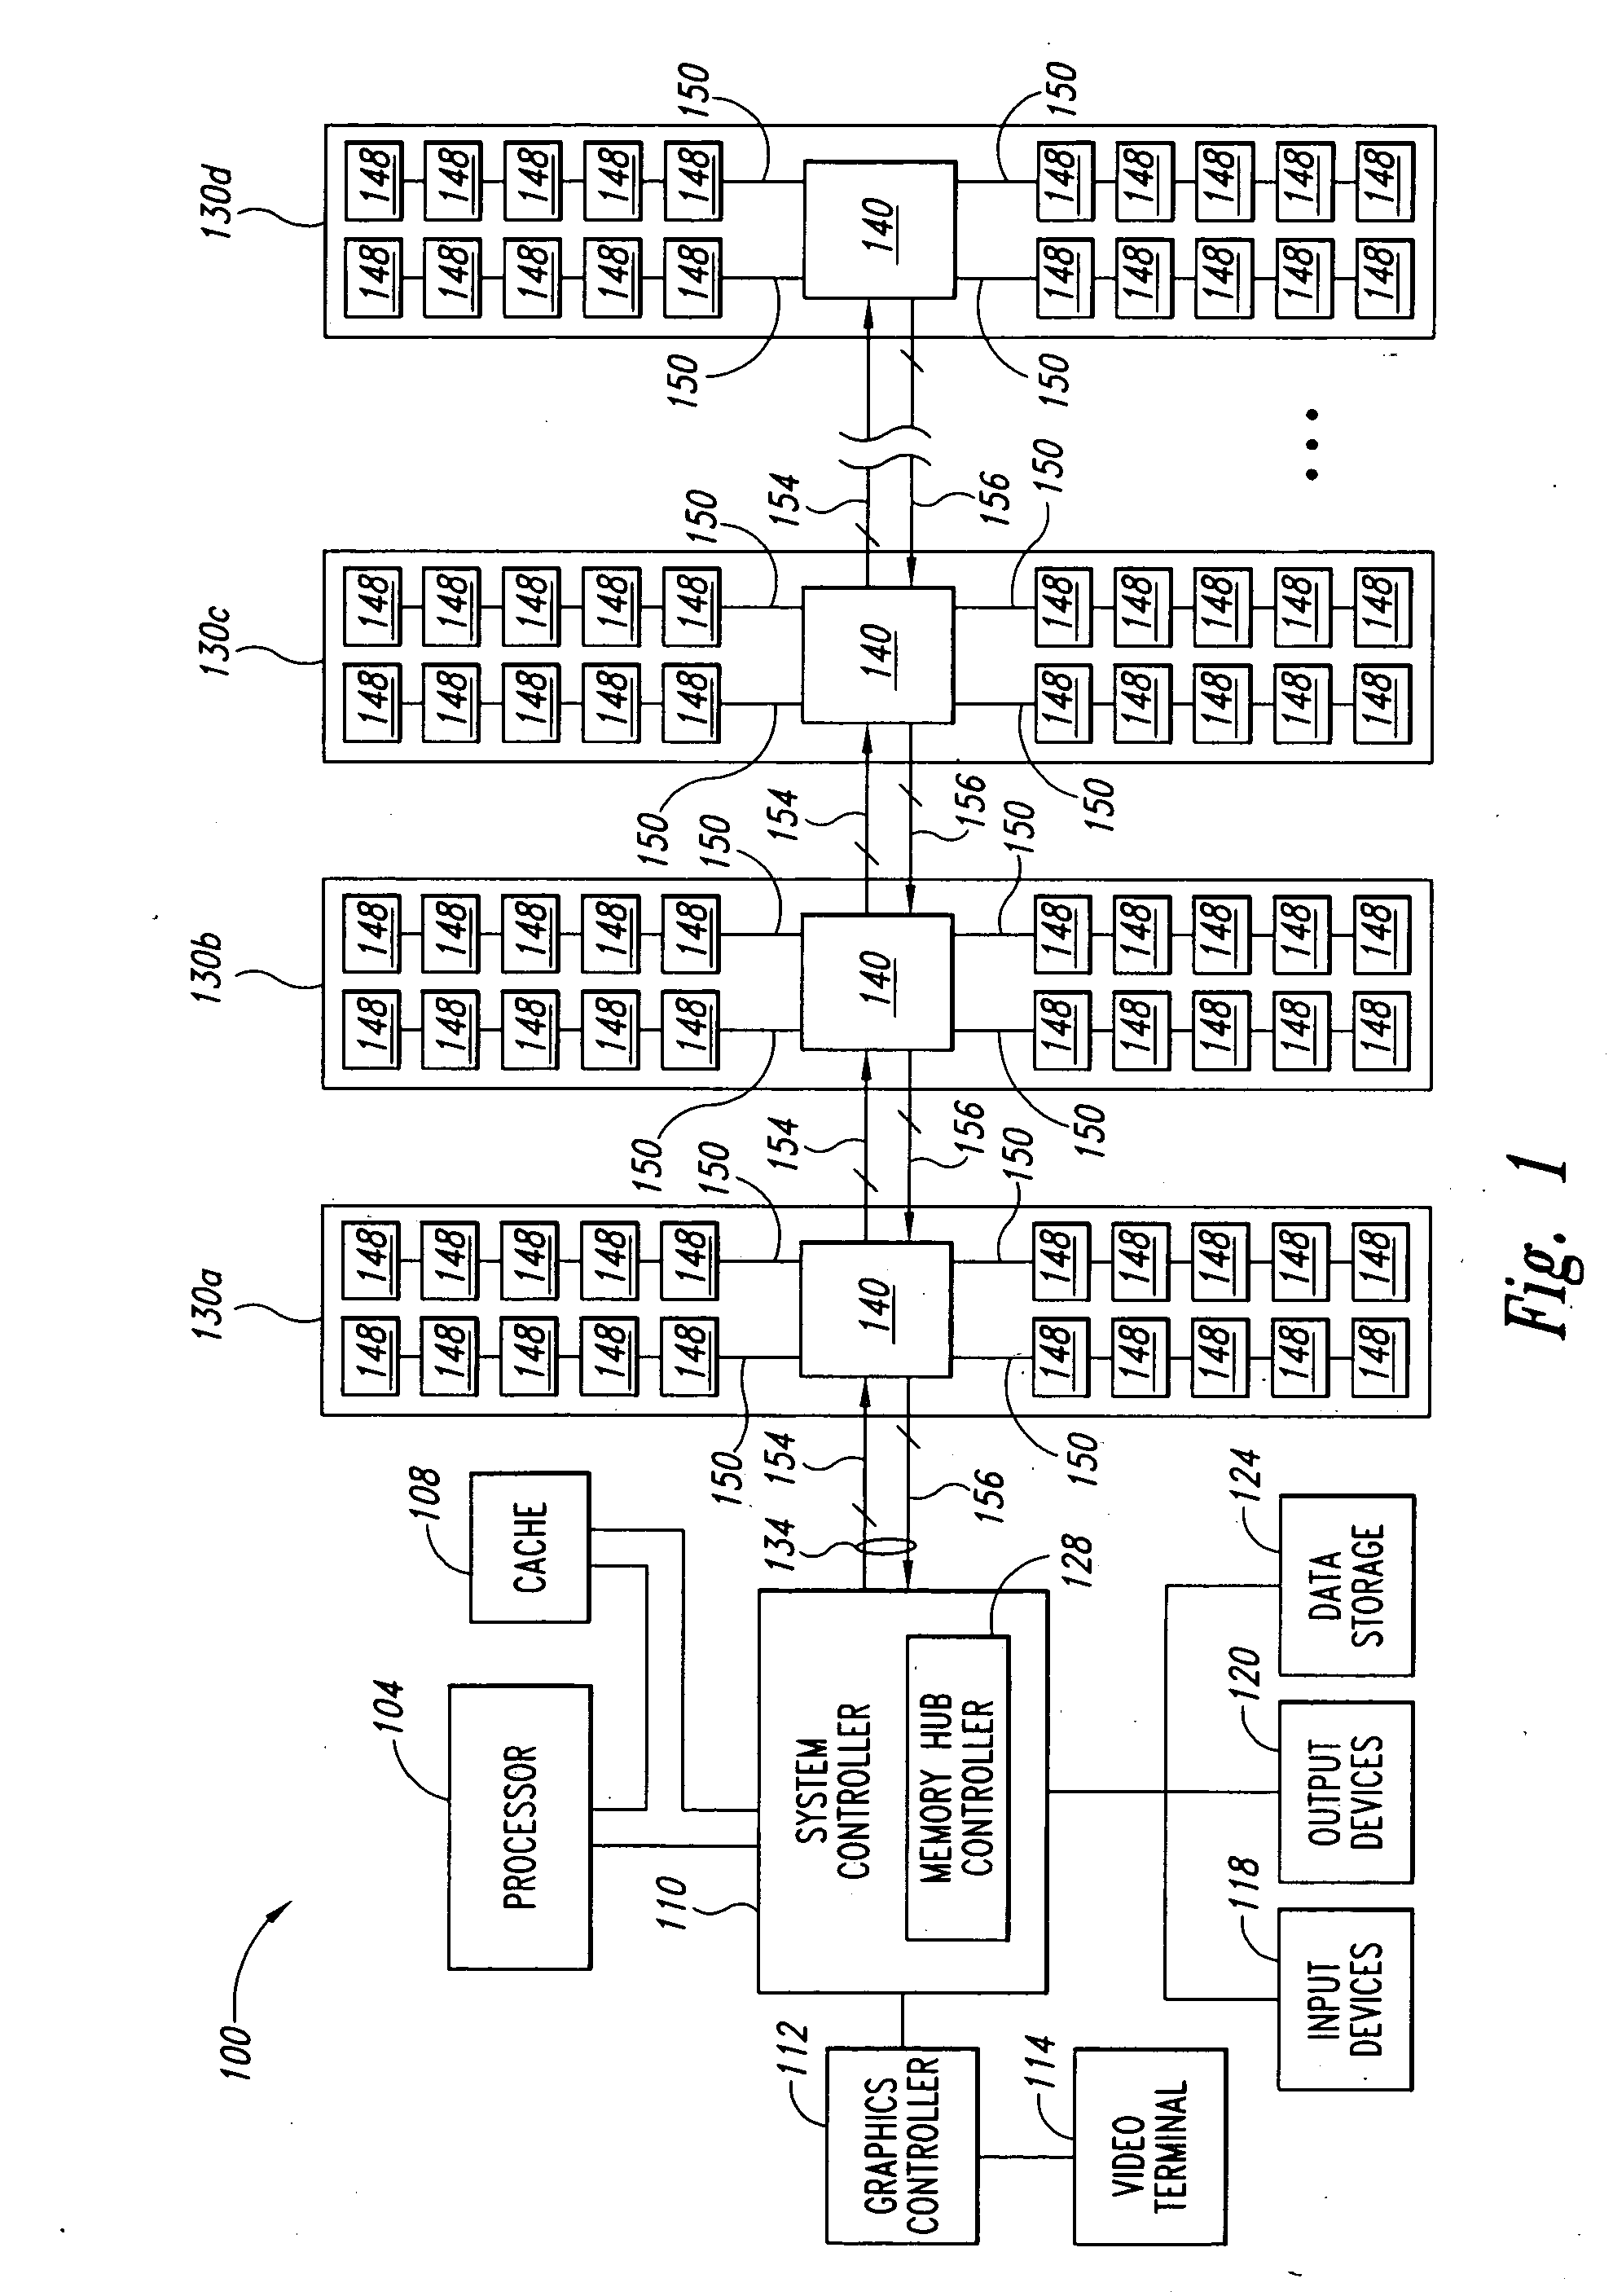 System and method for an asynchronous data buffer having buffer write and read pointers